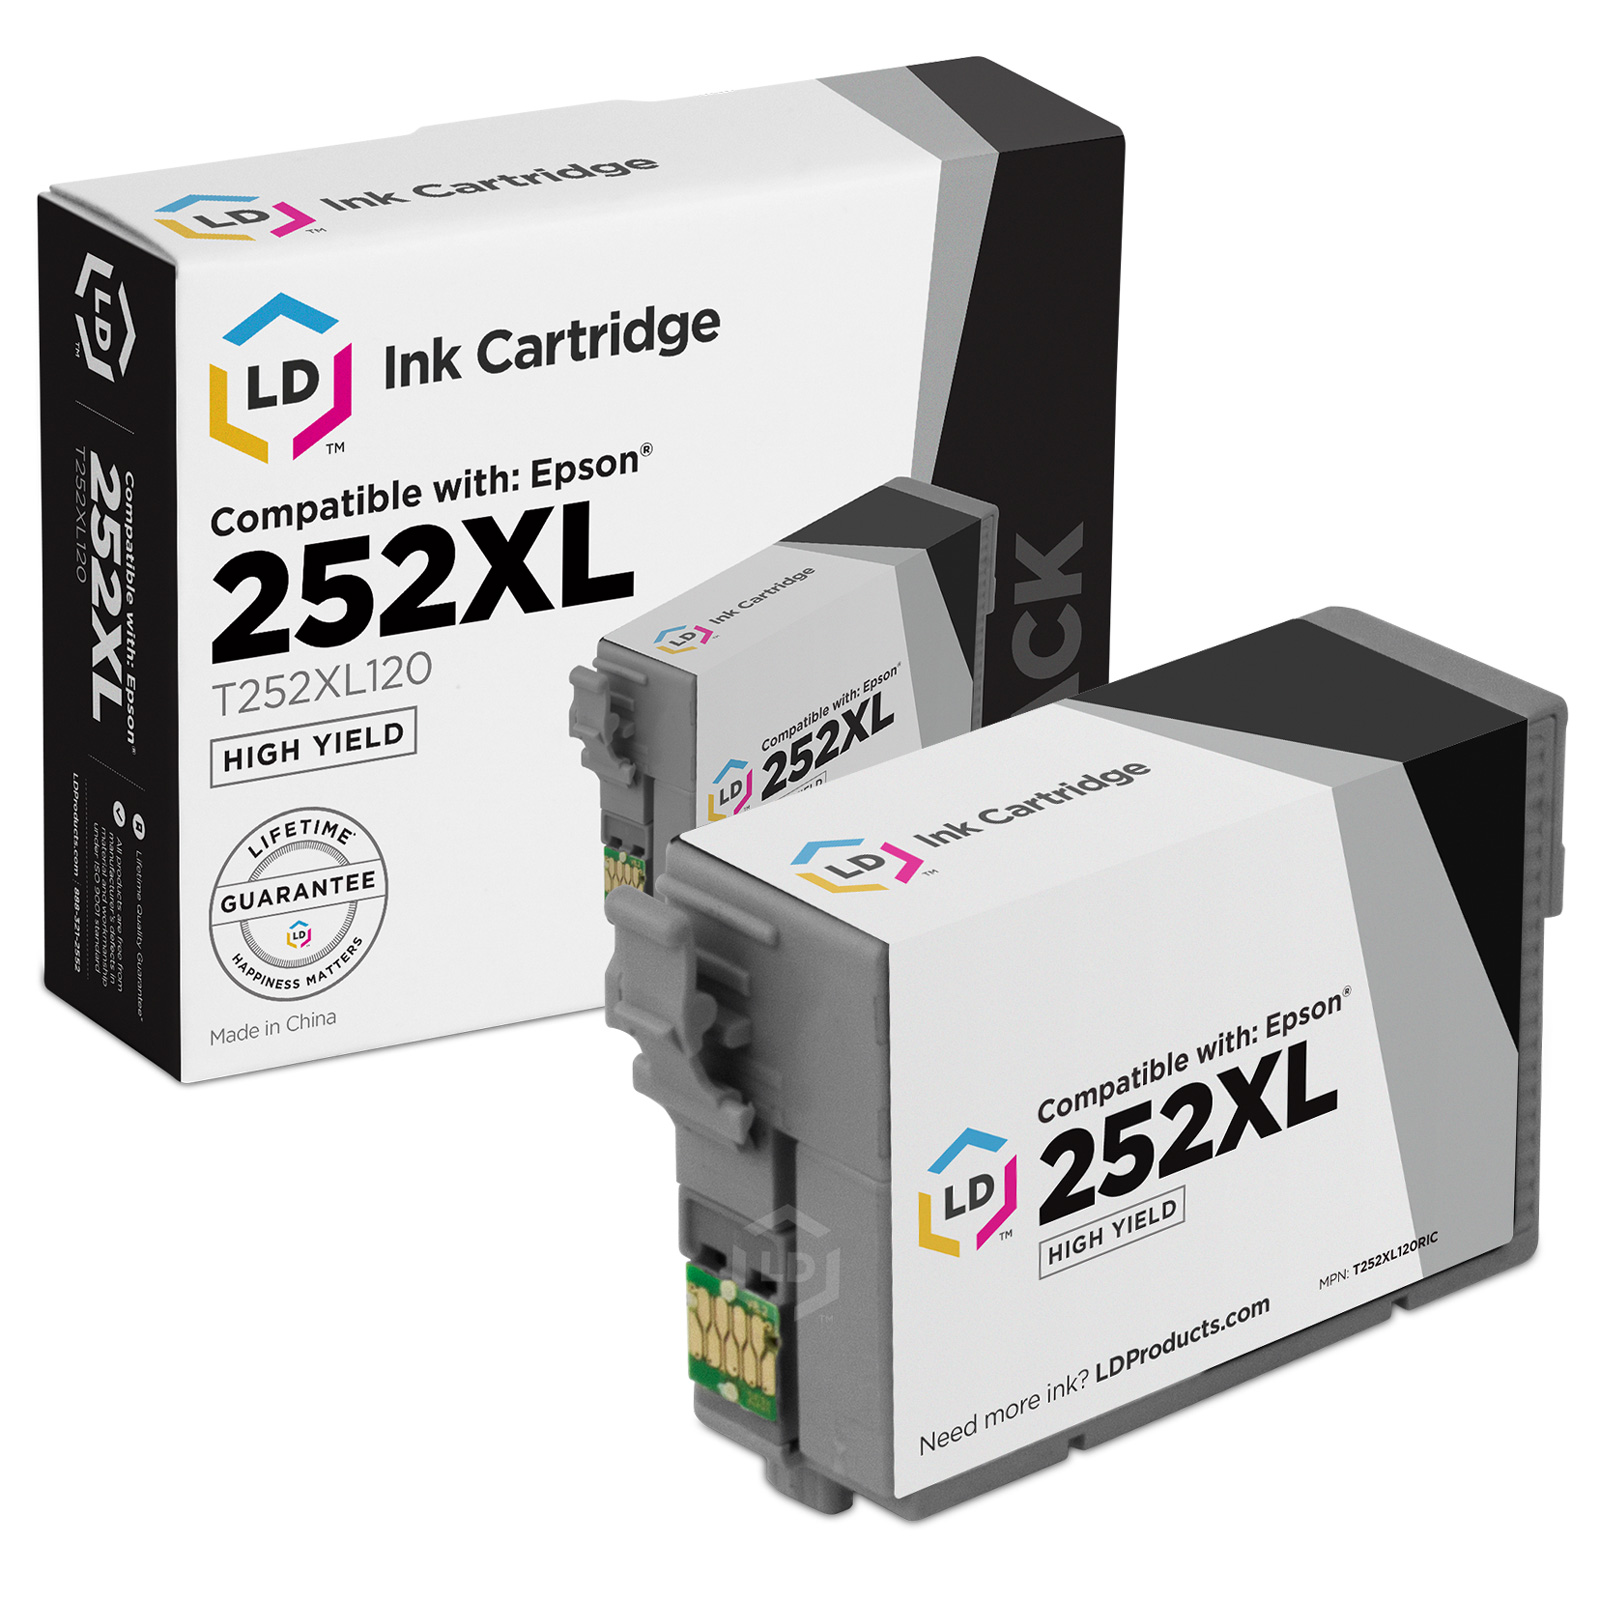 Ld Remanufactured Epson 252 252xl T252xl120 Set Of 2 High Yield Black Ink Cartridges For Use 8466